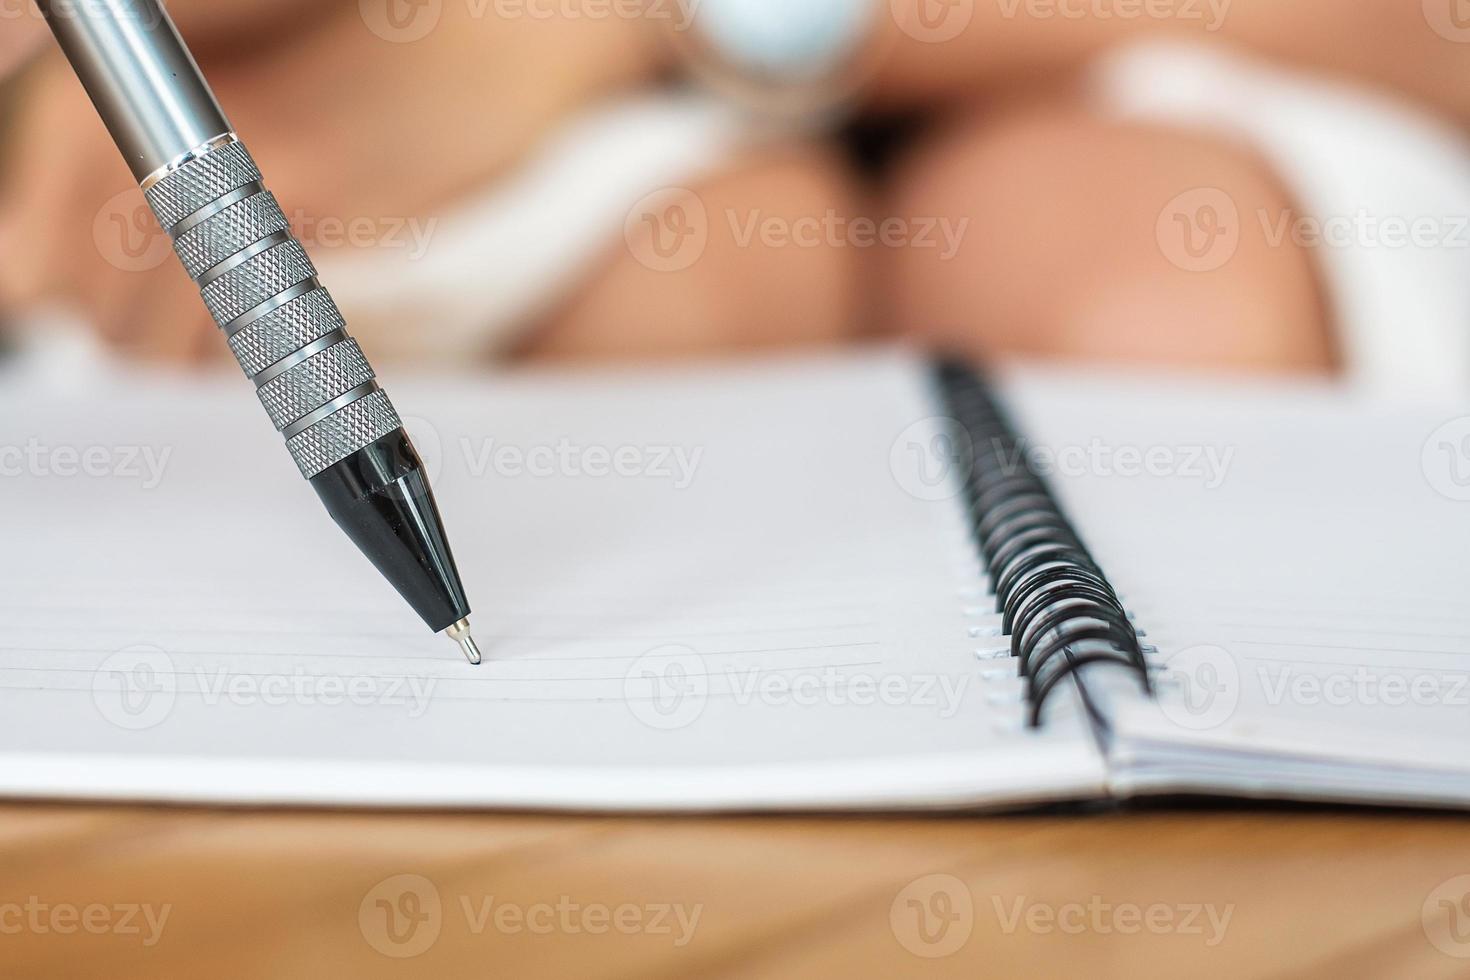 Businesswoman writing something on notebook in office or cafe, hand of woman holding pen with signature on paper report. business concepts photo